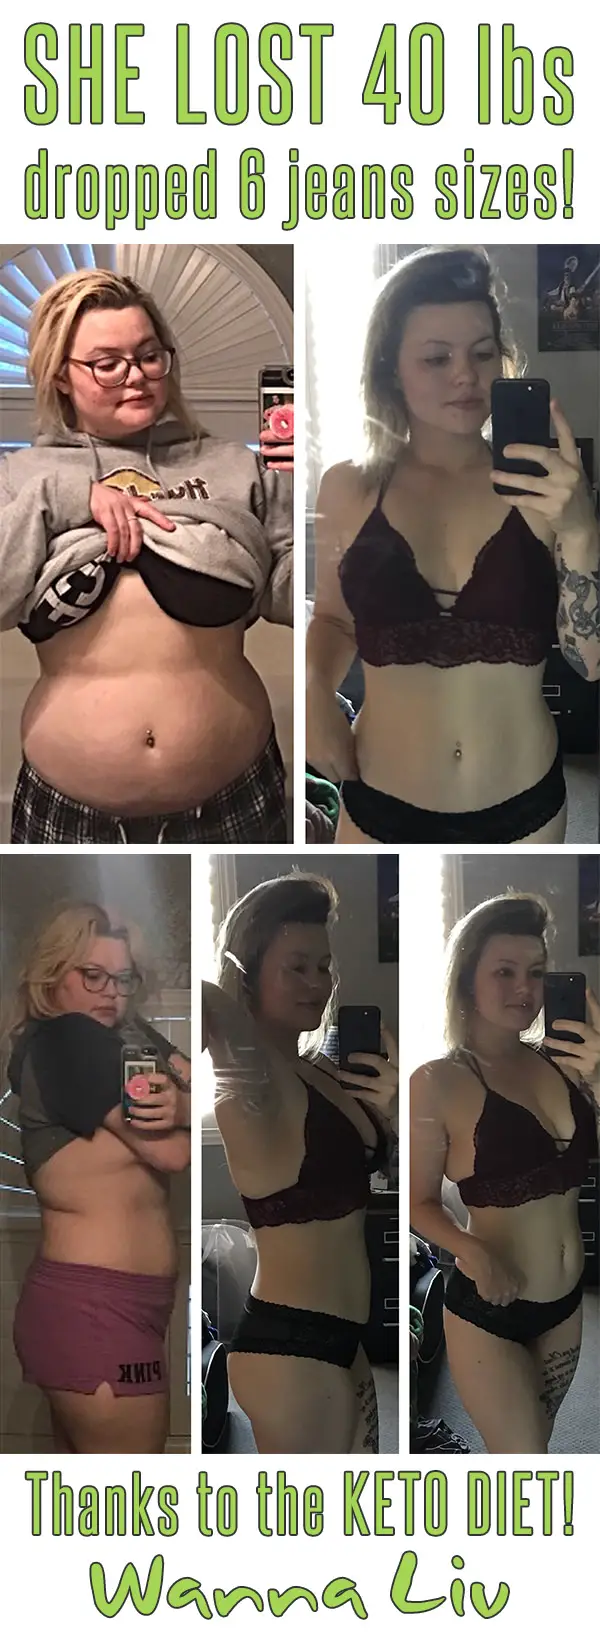 SHE LOST 40 lbs dropped 6 jeans sizes! Thanks to the KETO DIET! - Keto Success Stories #14 via Wanna Liv